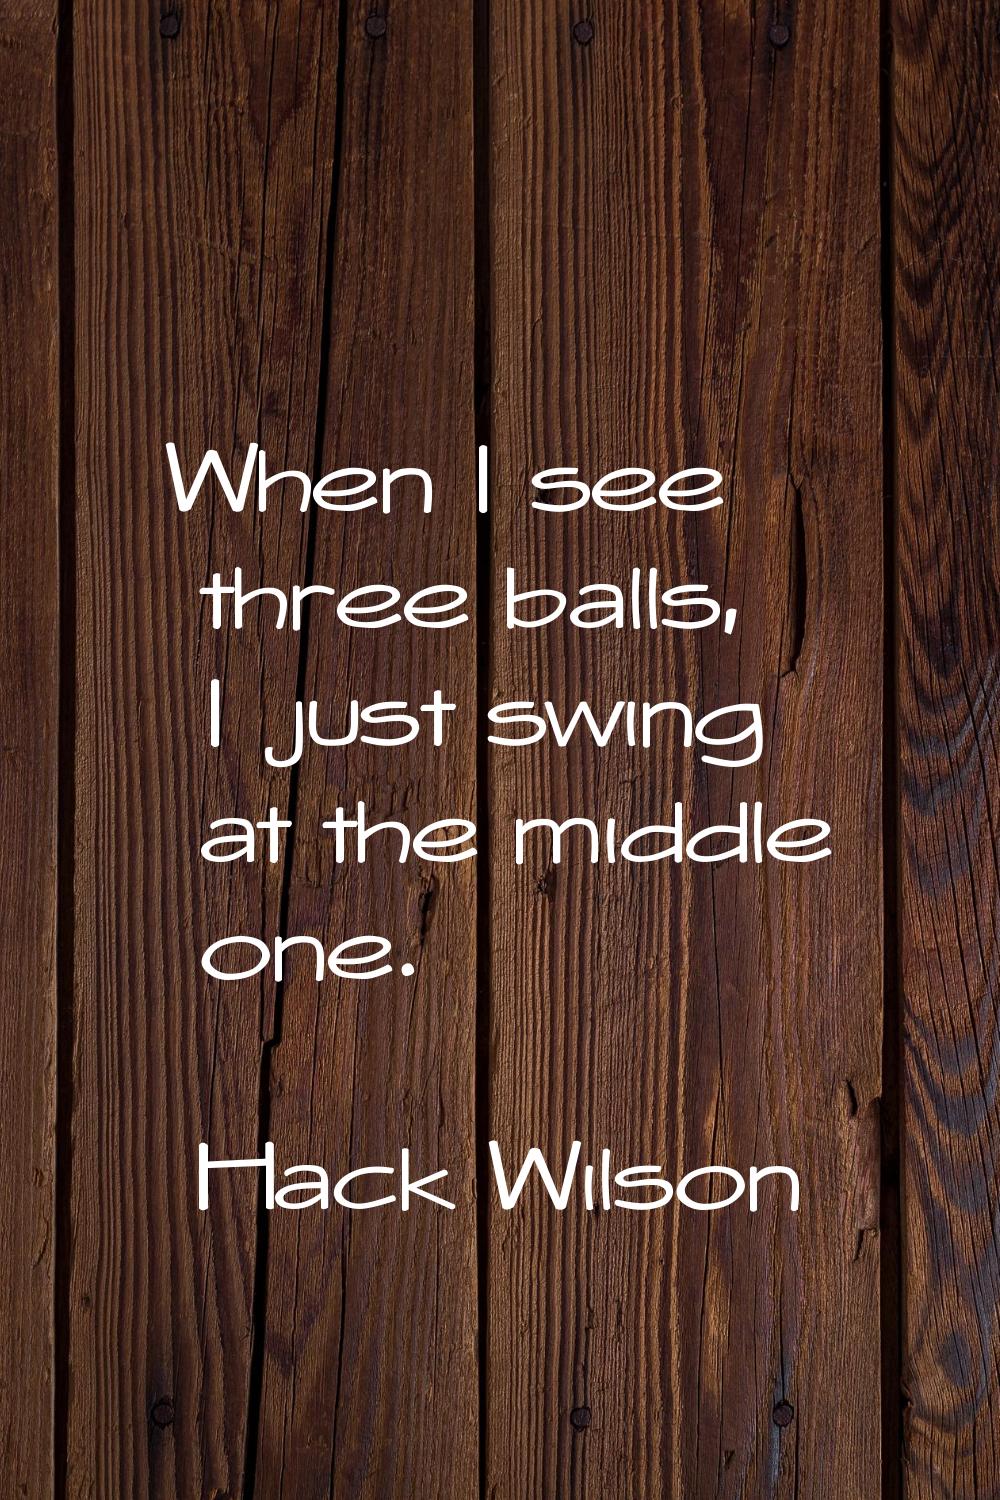 When I see three balls, I just swing at the middle one.